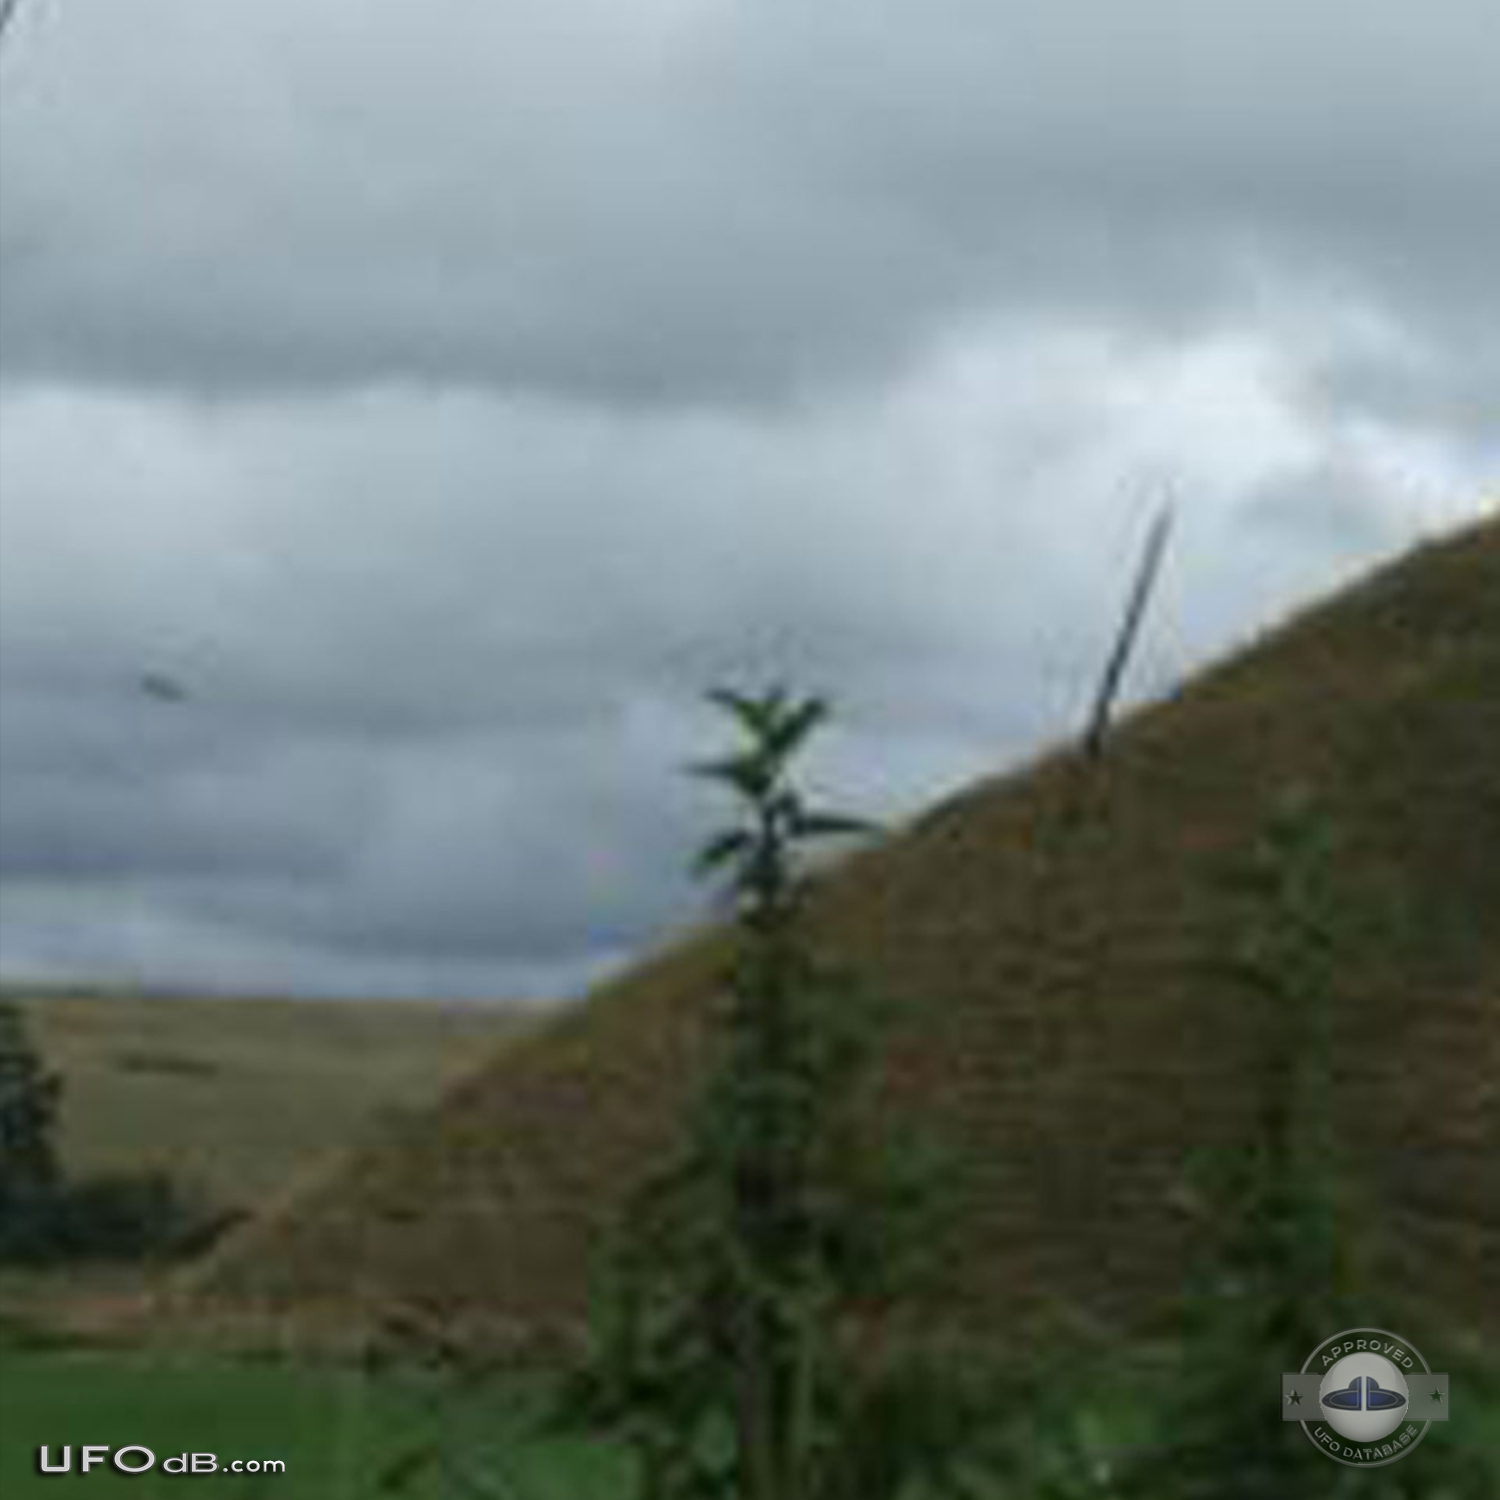 Saucer UFO caught on picture near Silbury Hill in Wiltshire county UK UFO Picture #480-2